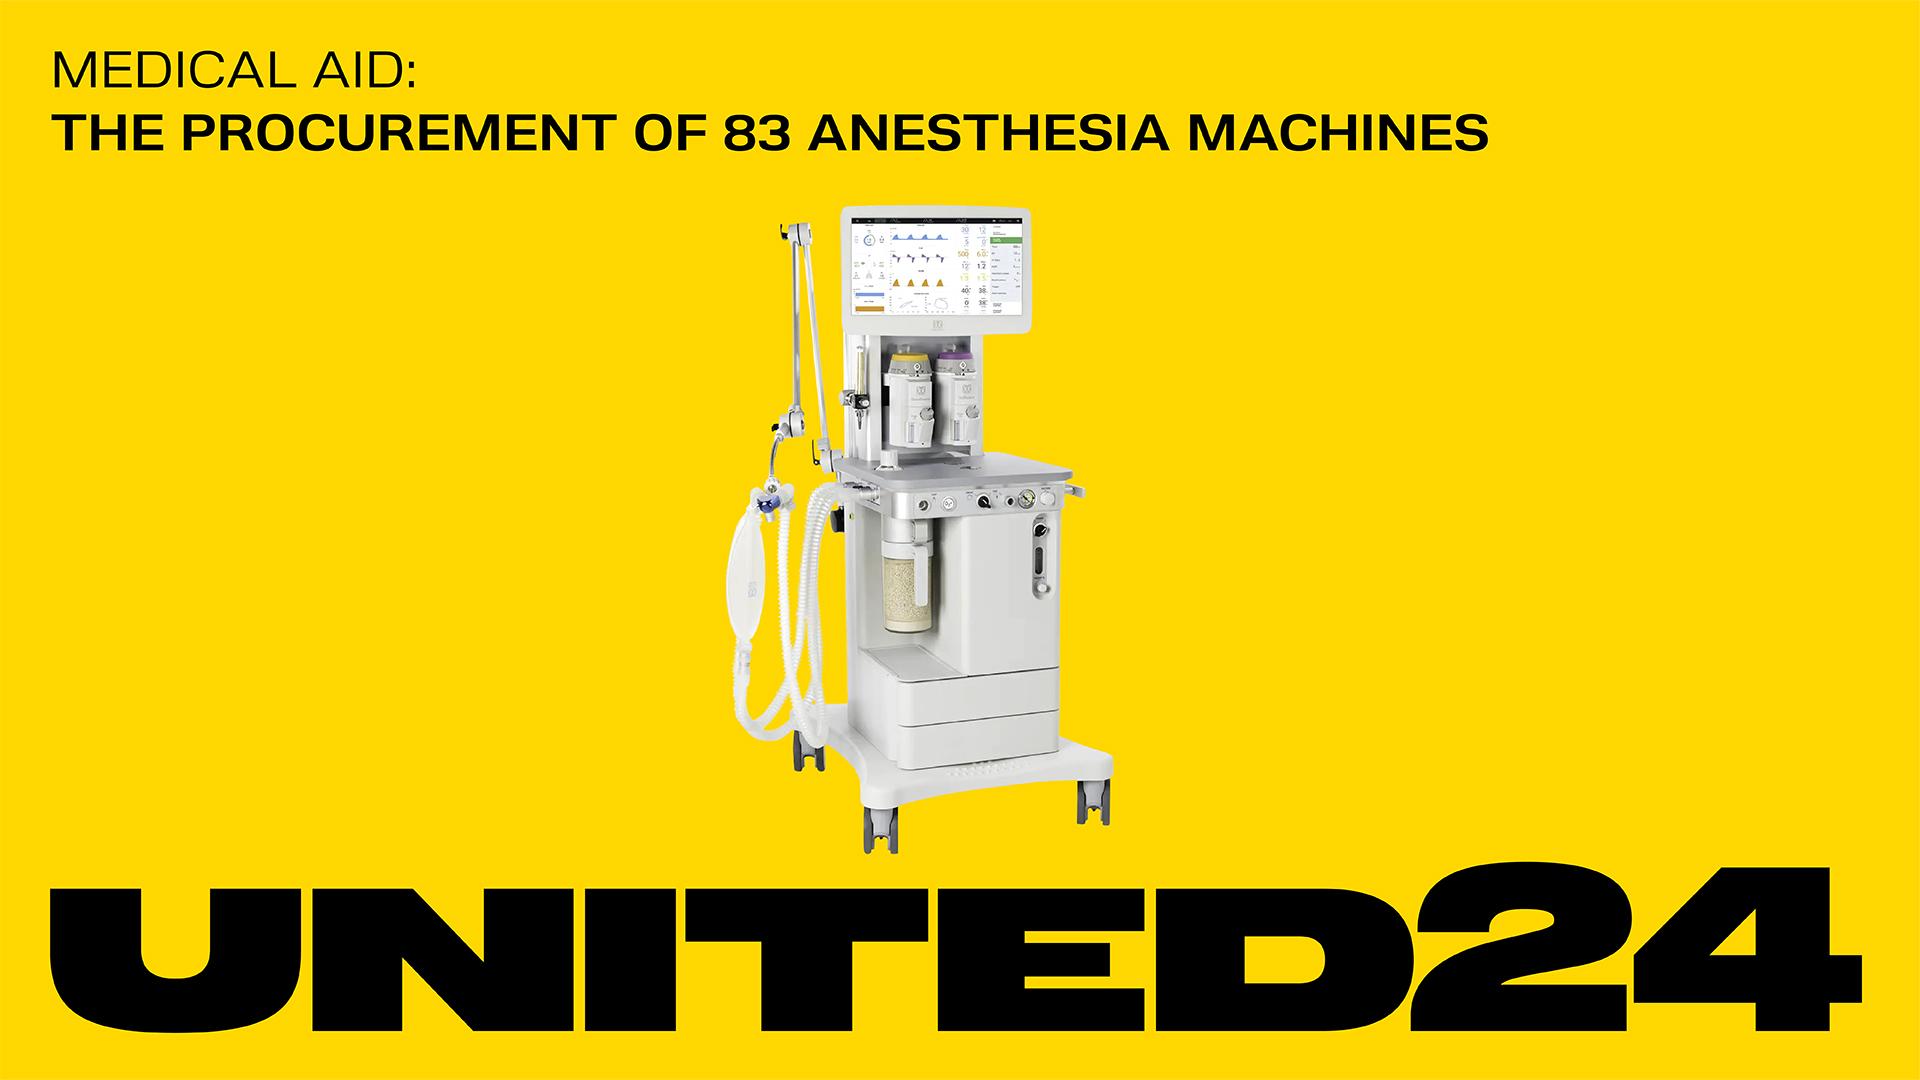 83 anesthesia machines have been purchased